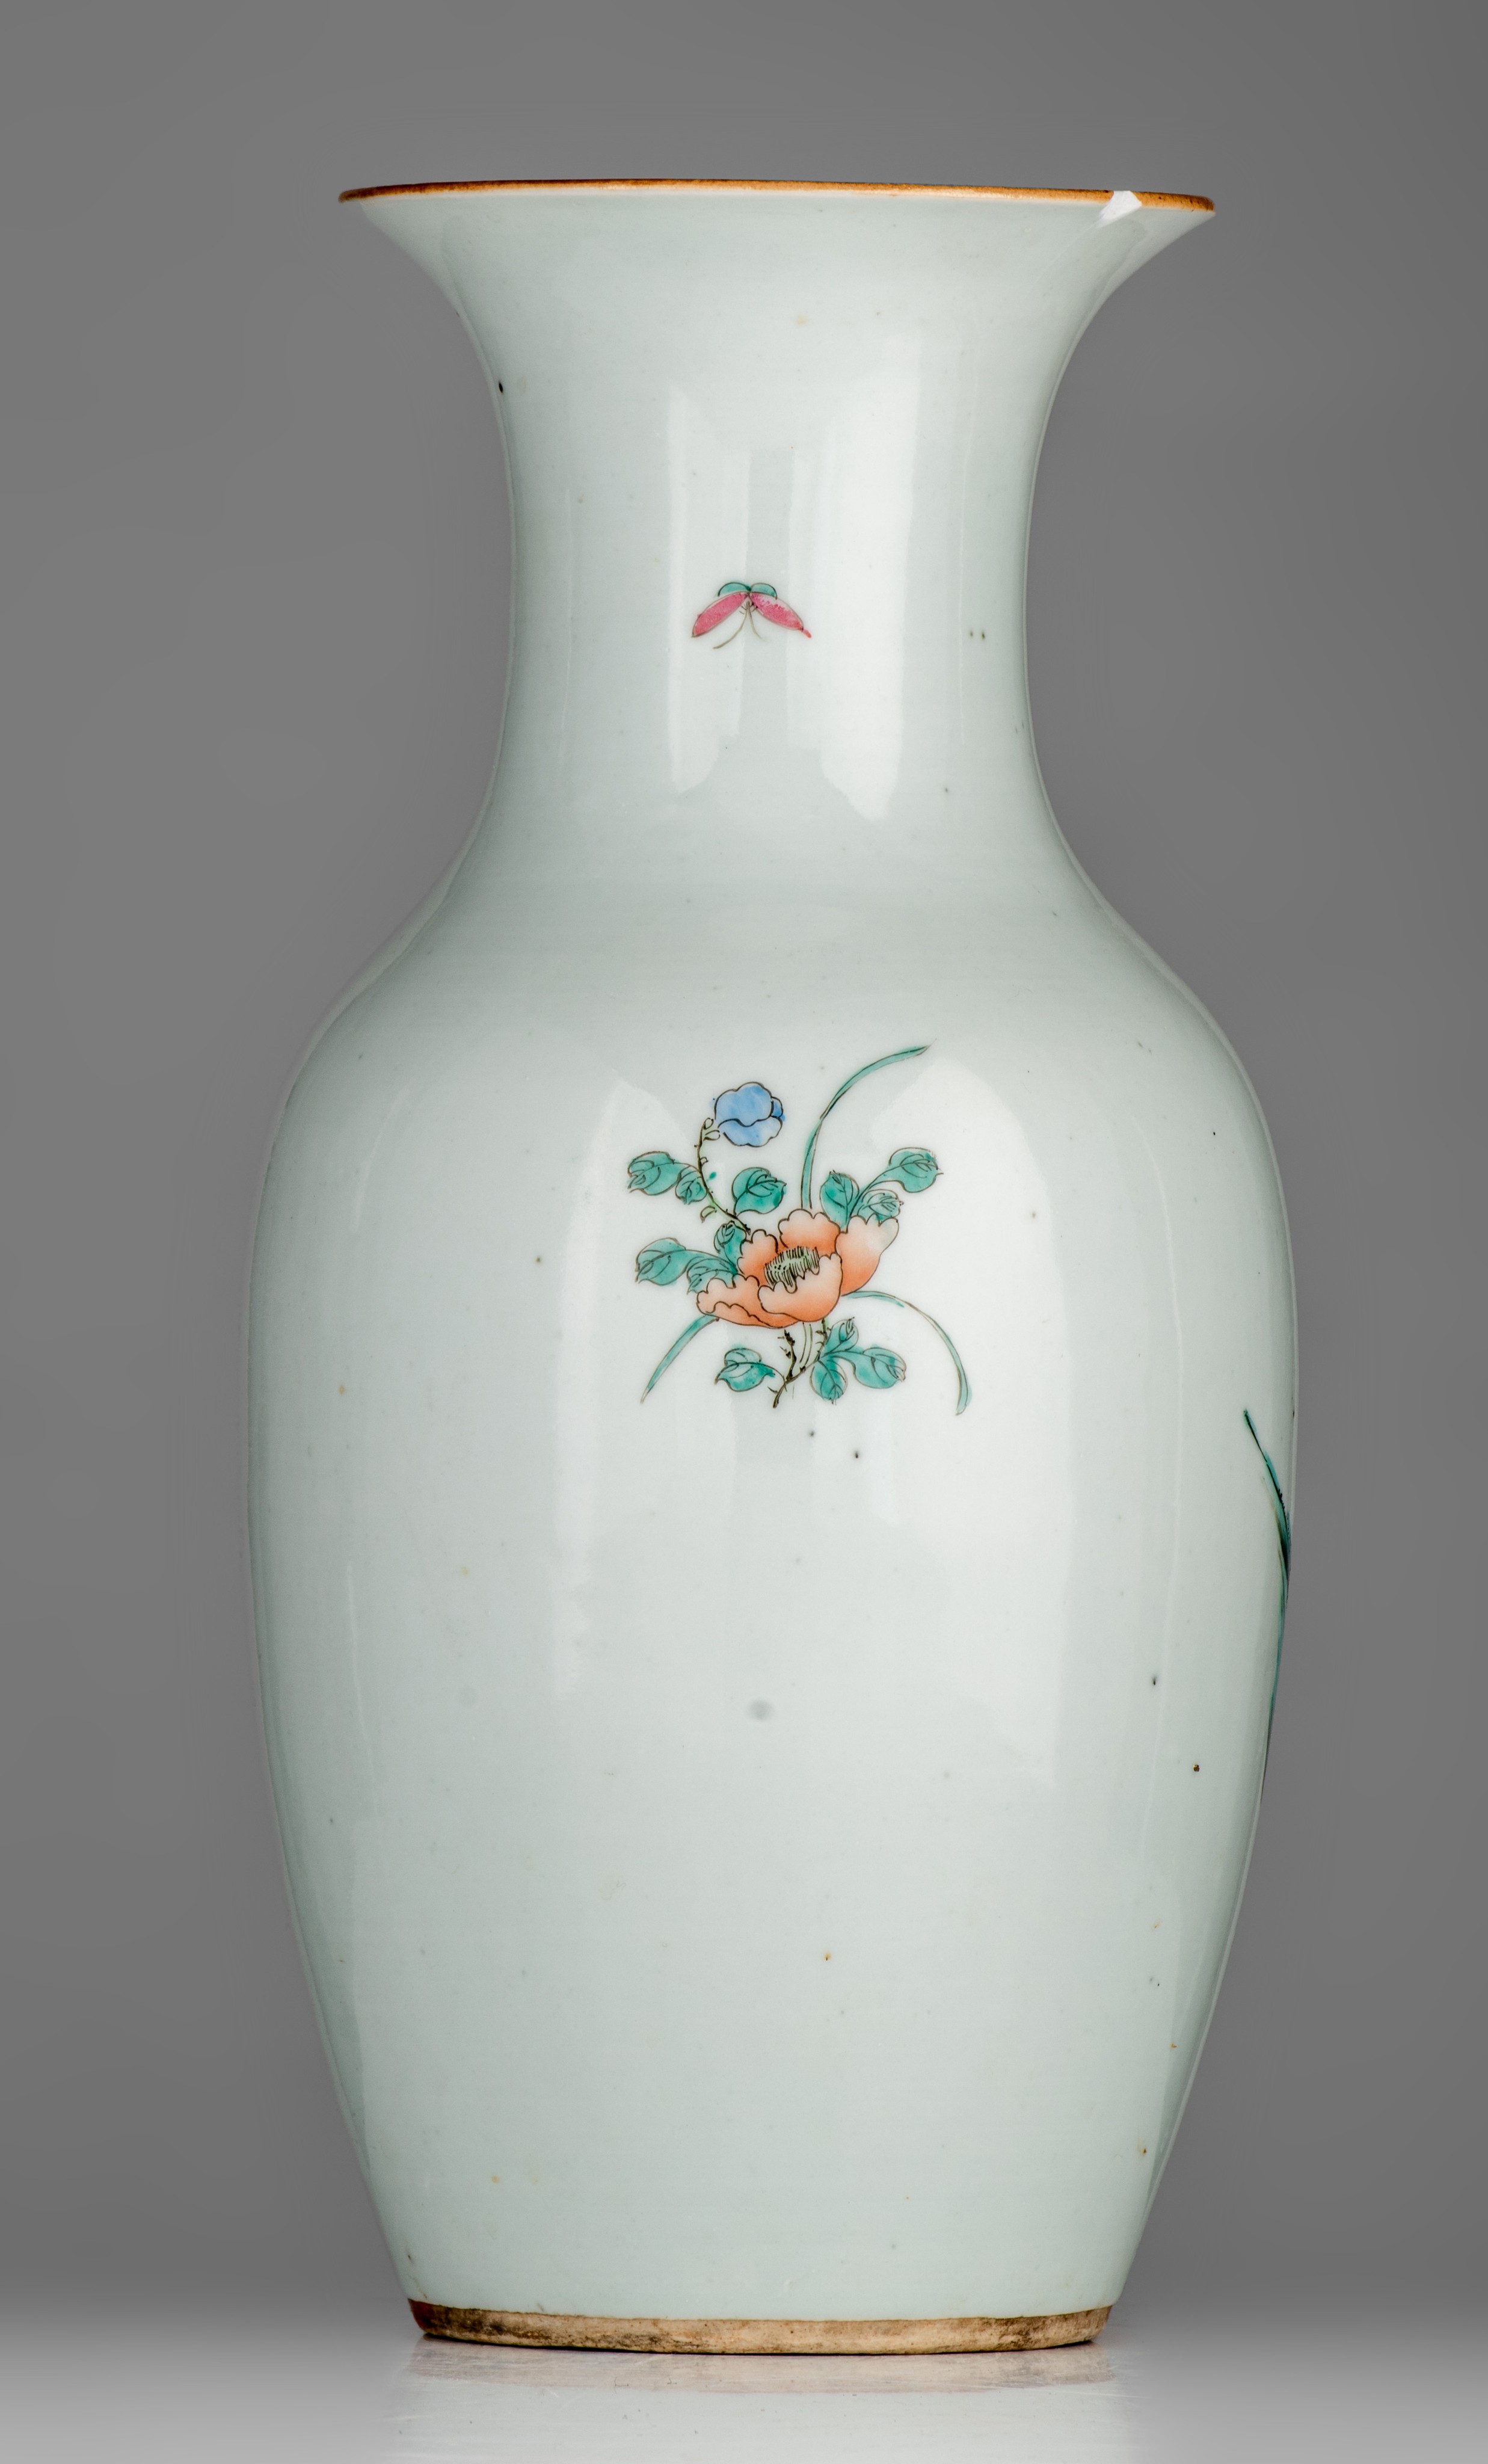 Four Chinese famille rose vases, some with a signed text, 19thC and Republic period, H 42,5 - 43,5 c - Image 4 of 20